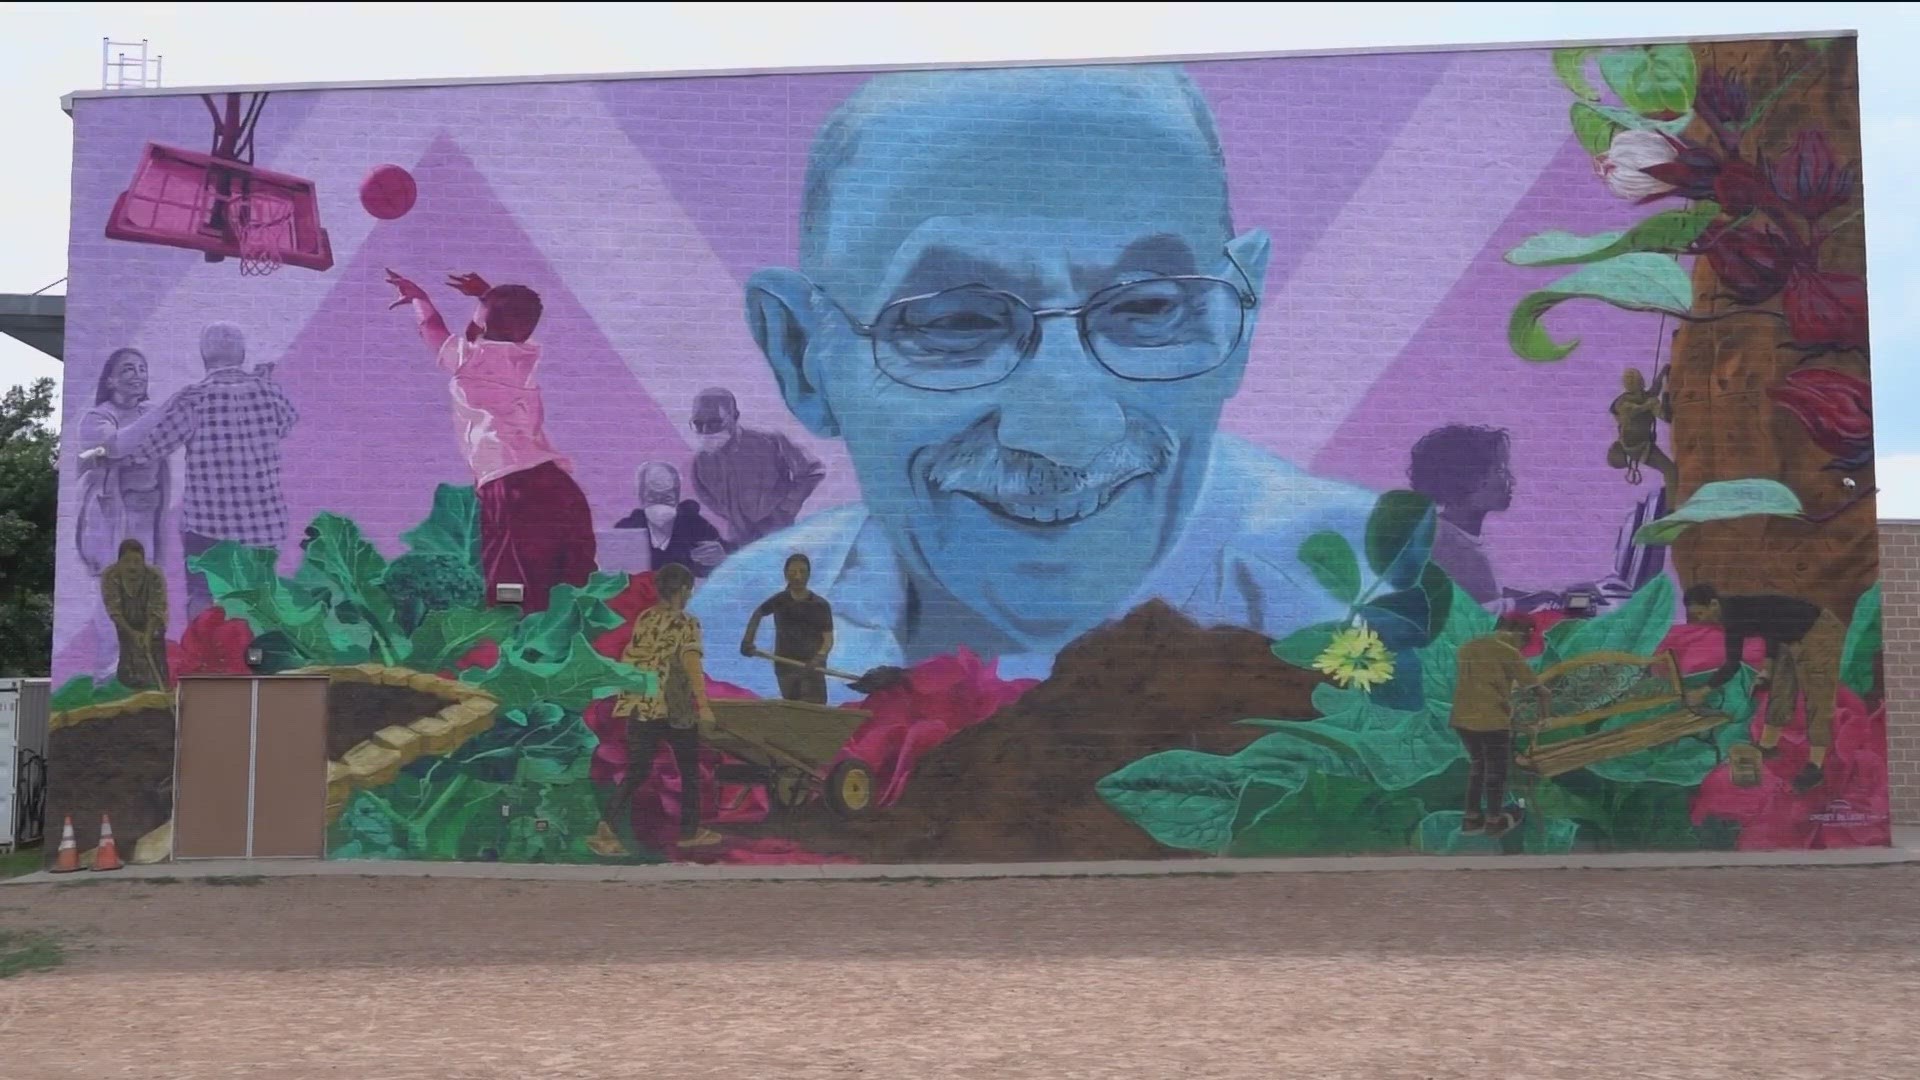 A new mural honoring Austin's first Latino mayor, Gus Garcia, is now displayed on the side of the rec center named in his honor.